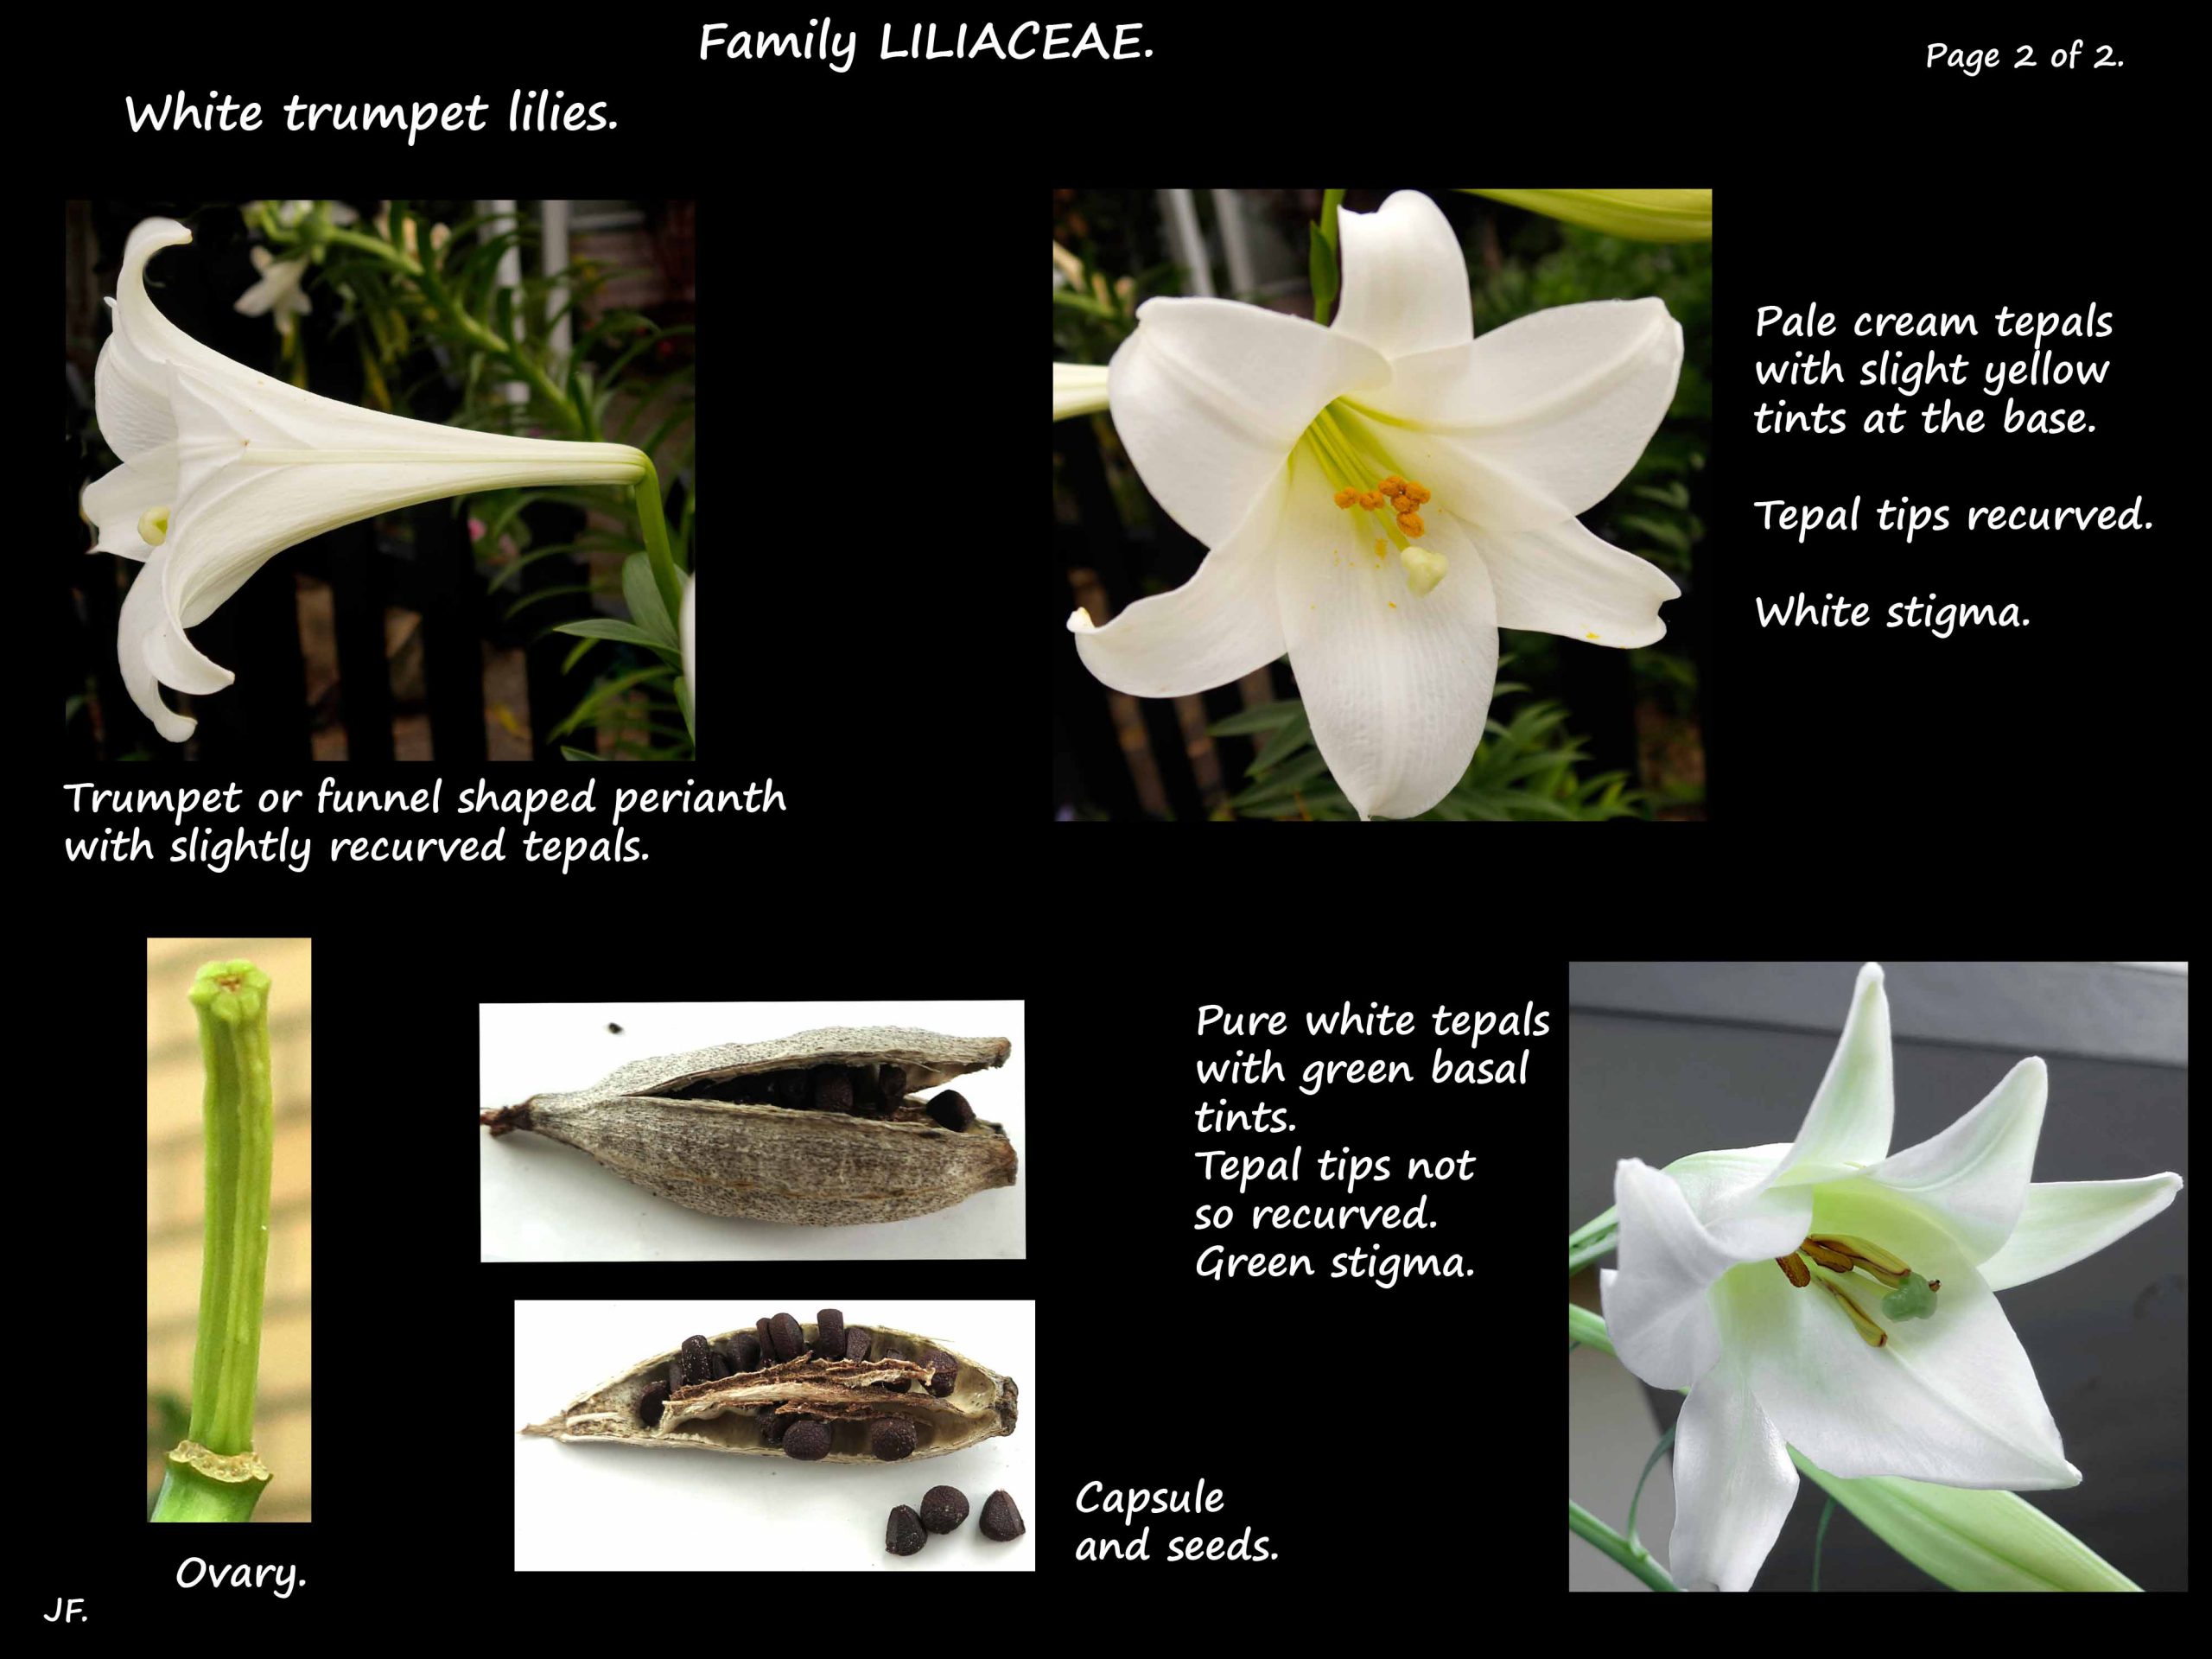 2 White trumpet lily flower & capsule